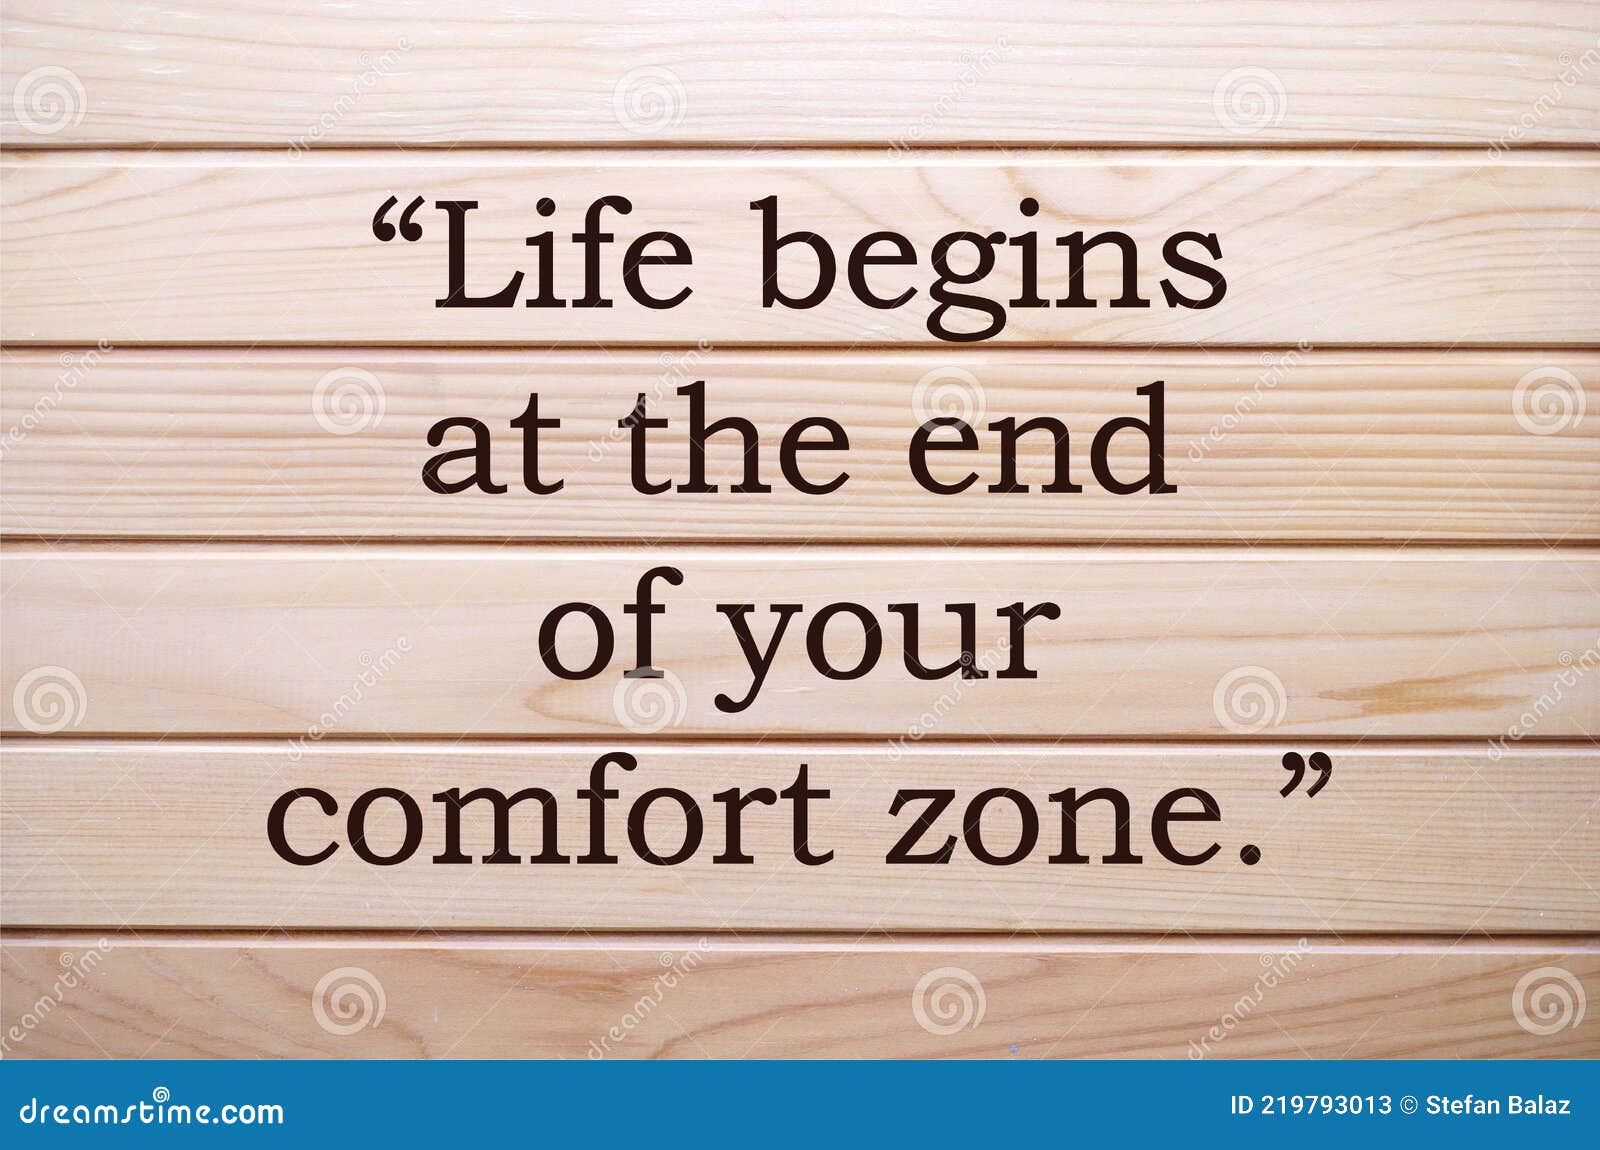 Life Begins At The End Of Your Comfort Zone, Quotes. Comfort Zone Concept.  Motivational And Inspirational Quote For Success, Life. Stock Image - Image  Of Empowering, Inspirational: 219793013